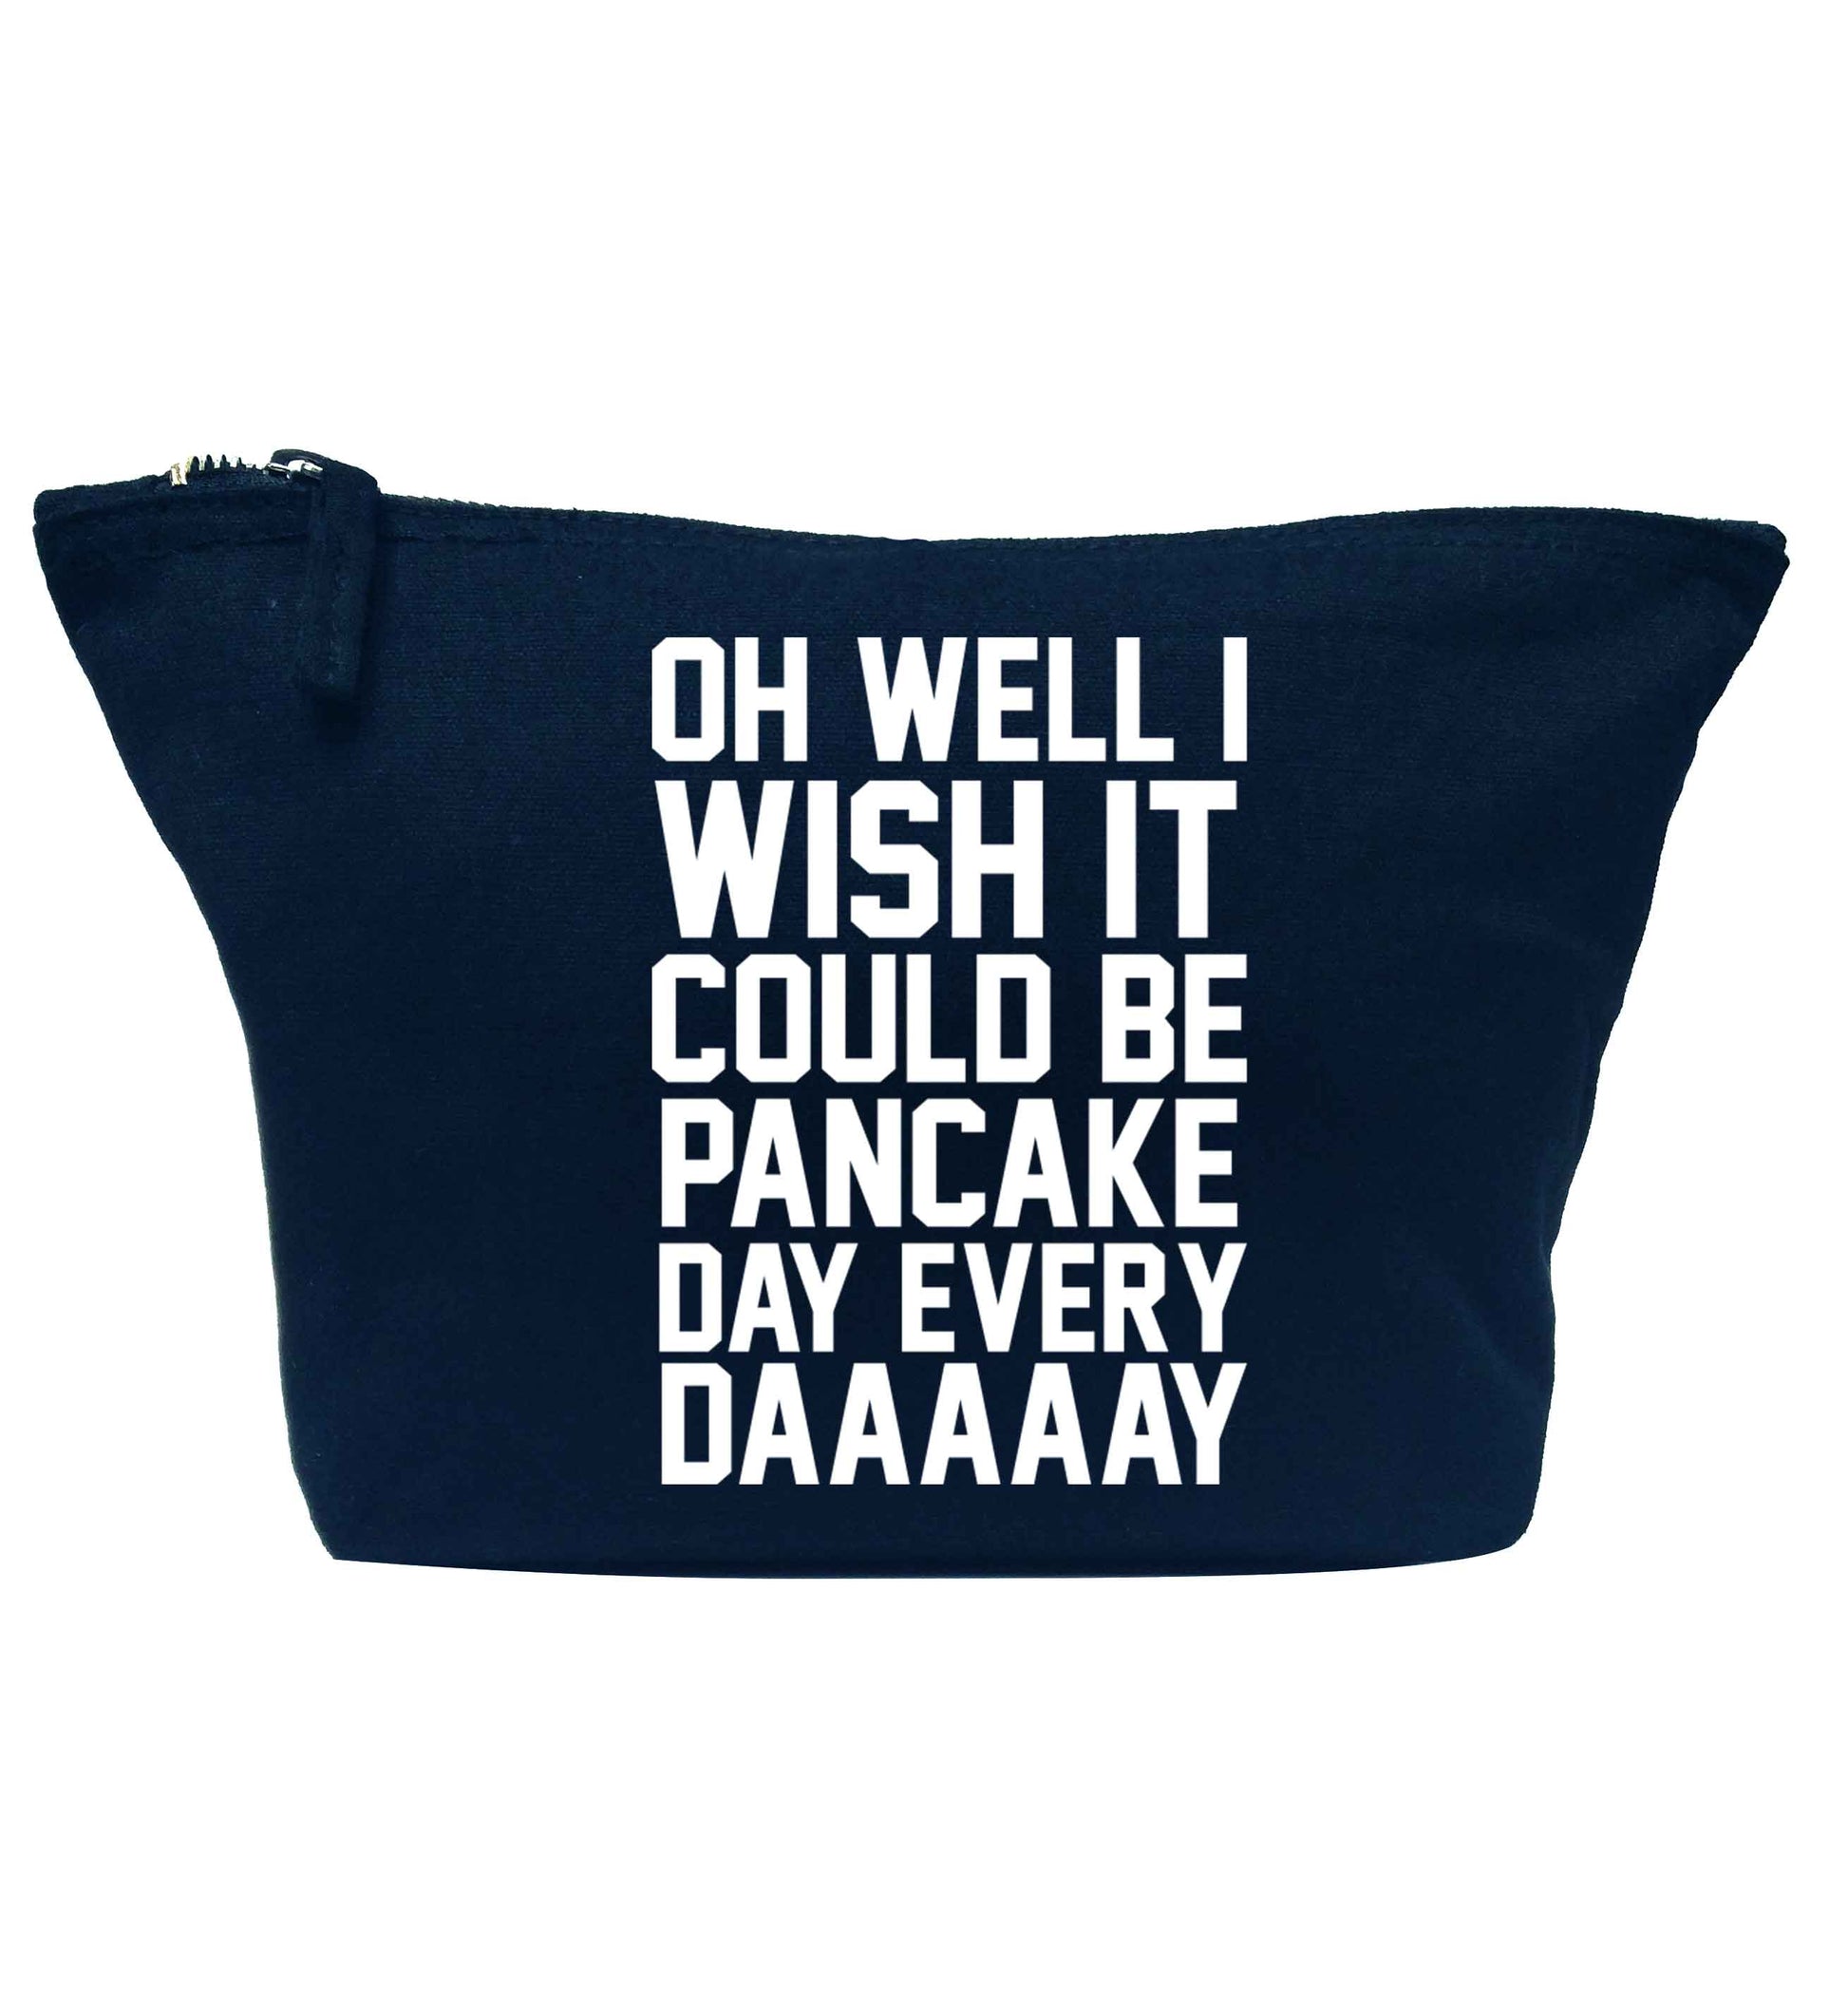 Oh well I wish it could be pancake day every day navy makeup bag